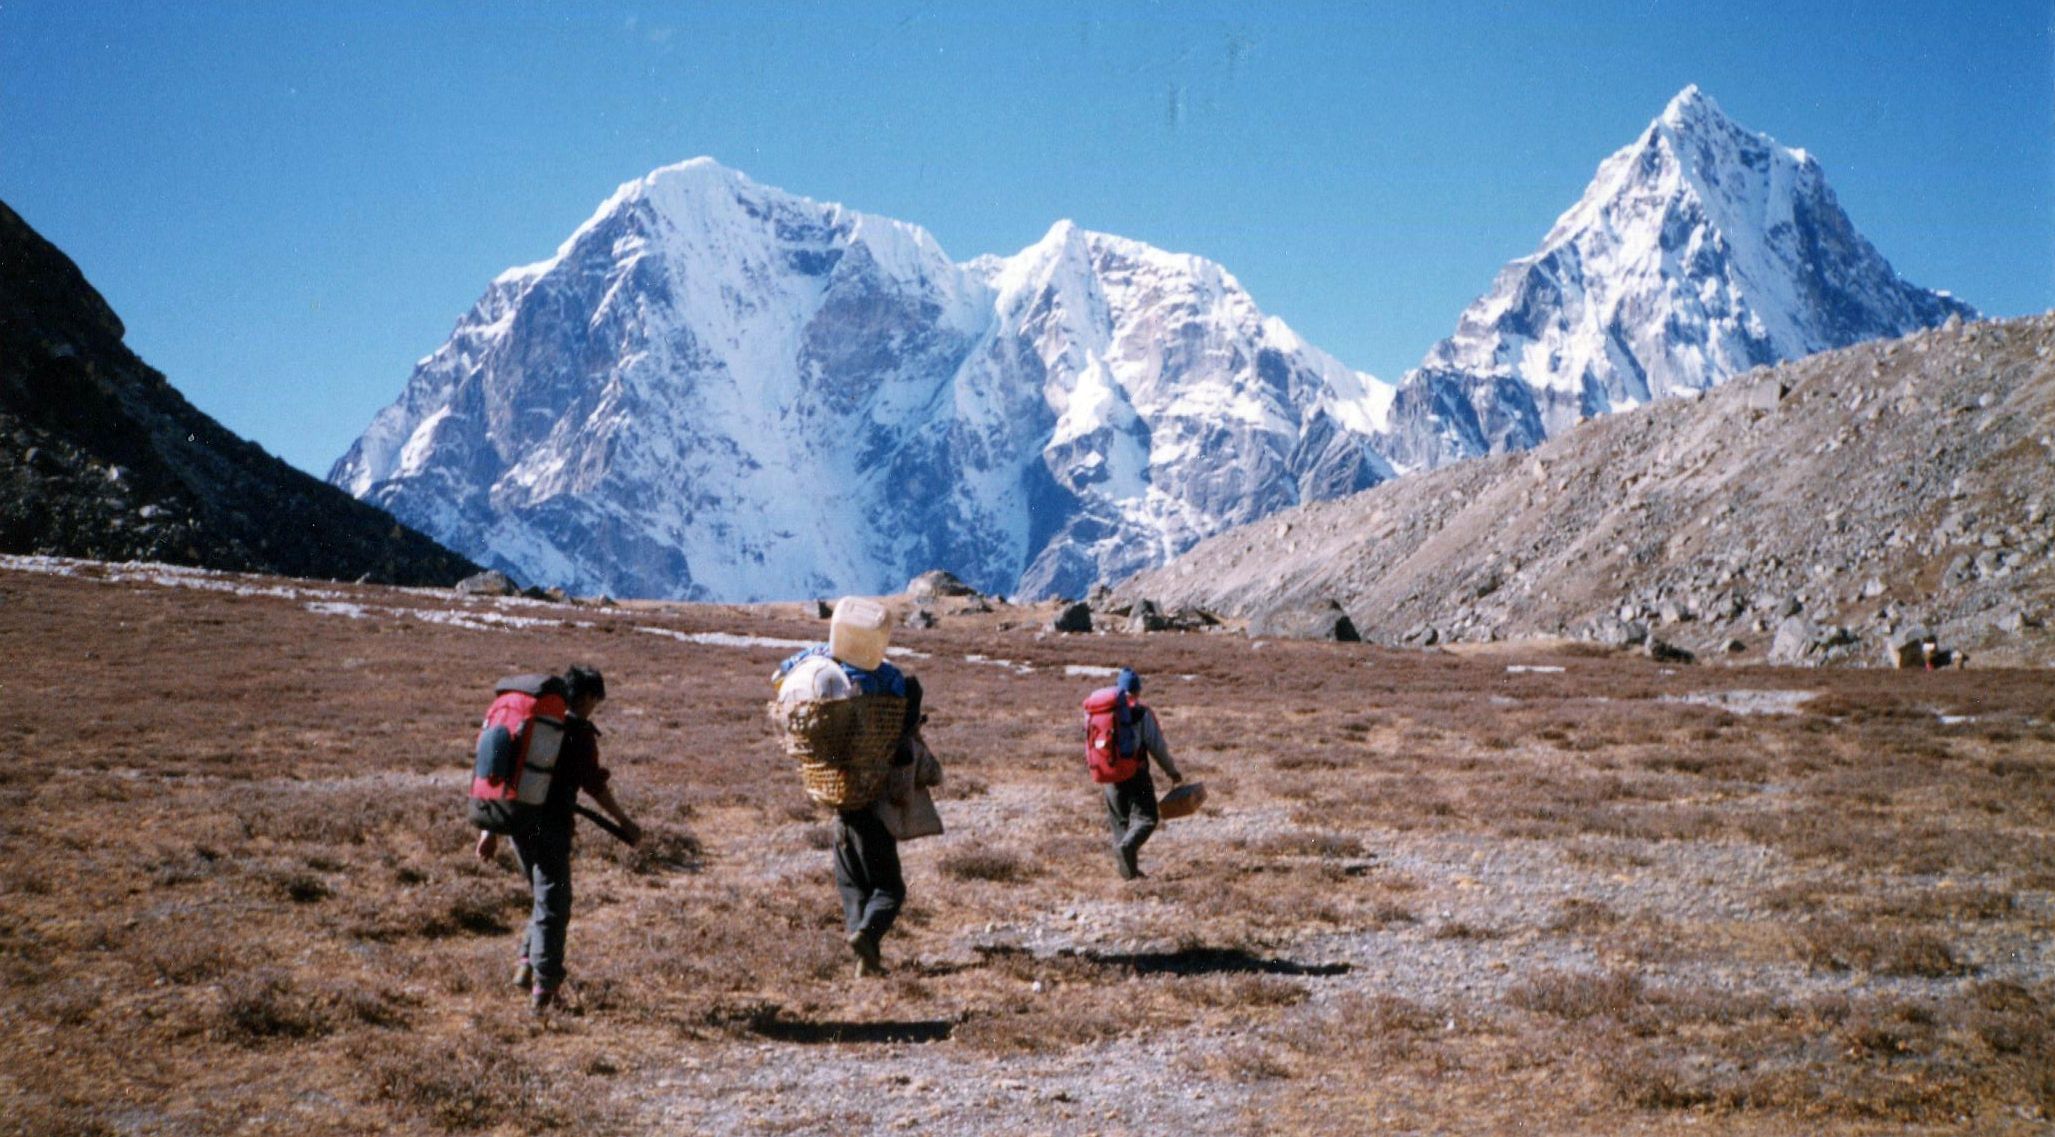 Taboche and Cholatse on approach to Khumbu Glacier after descent from Kongma La